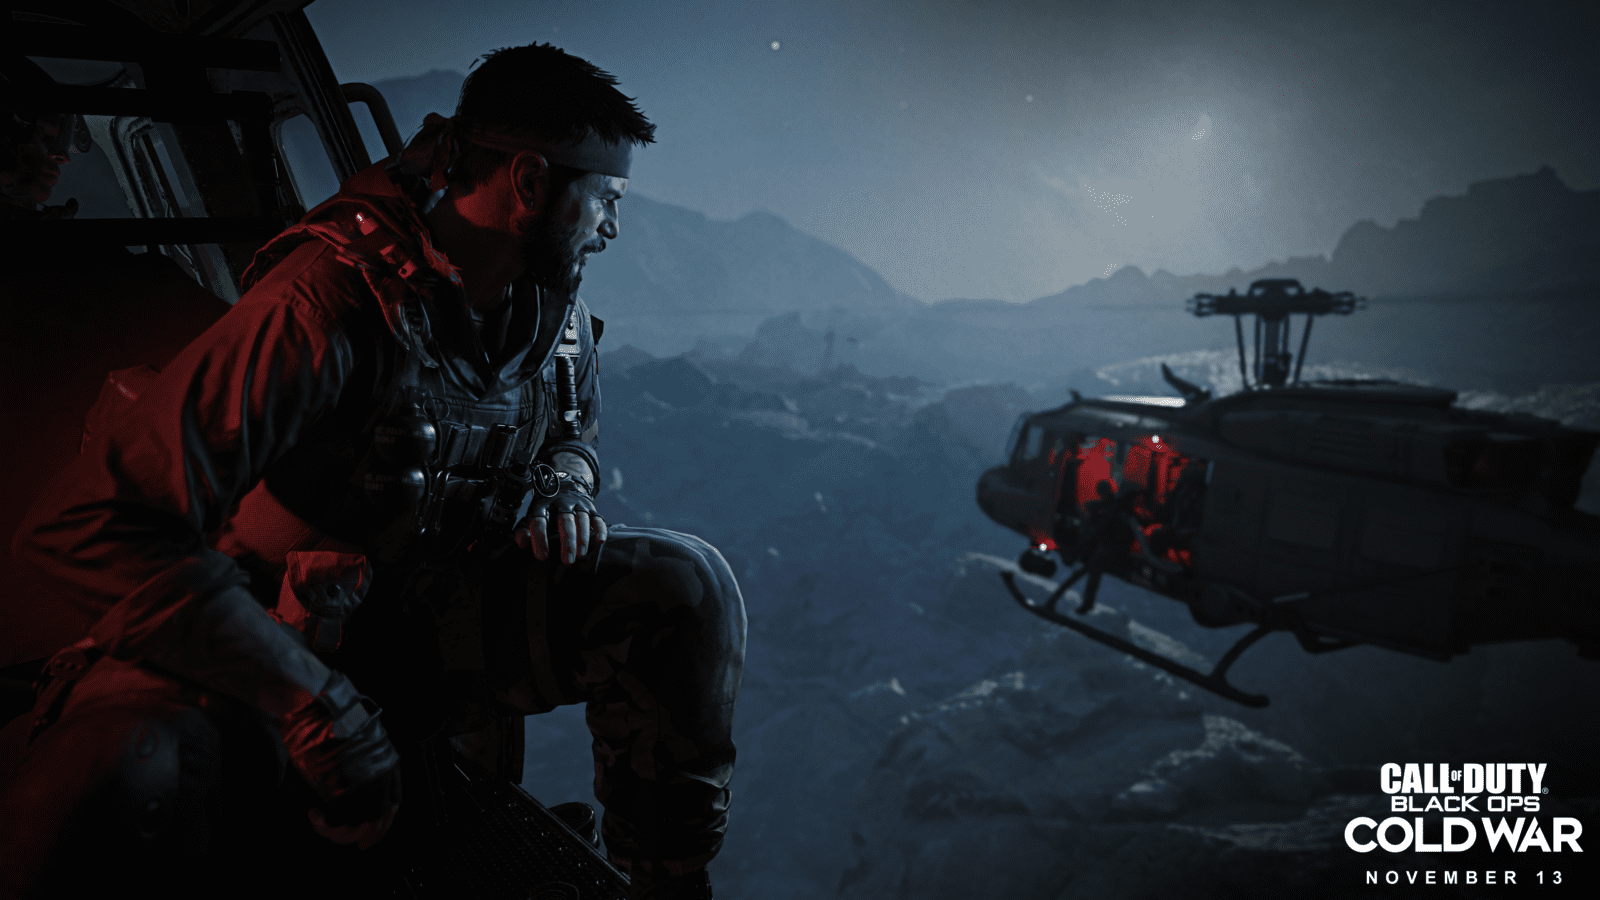 'Call of Duty Black Ops Cold War' Single Player Campaign Review (Xbox